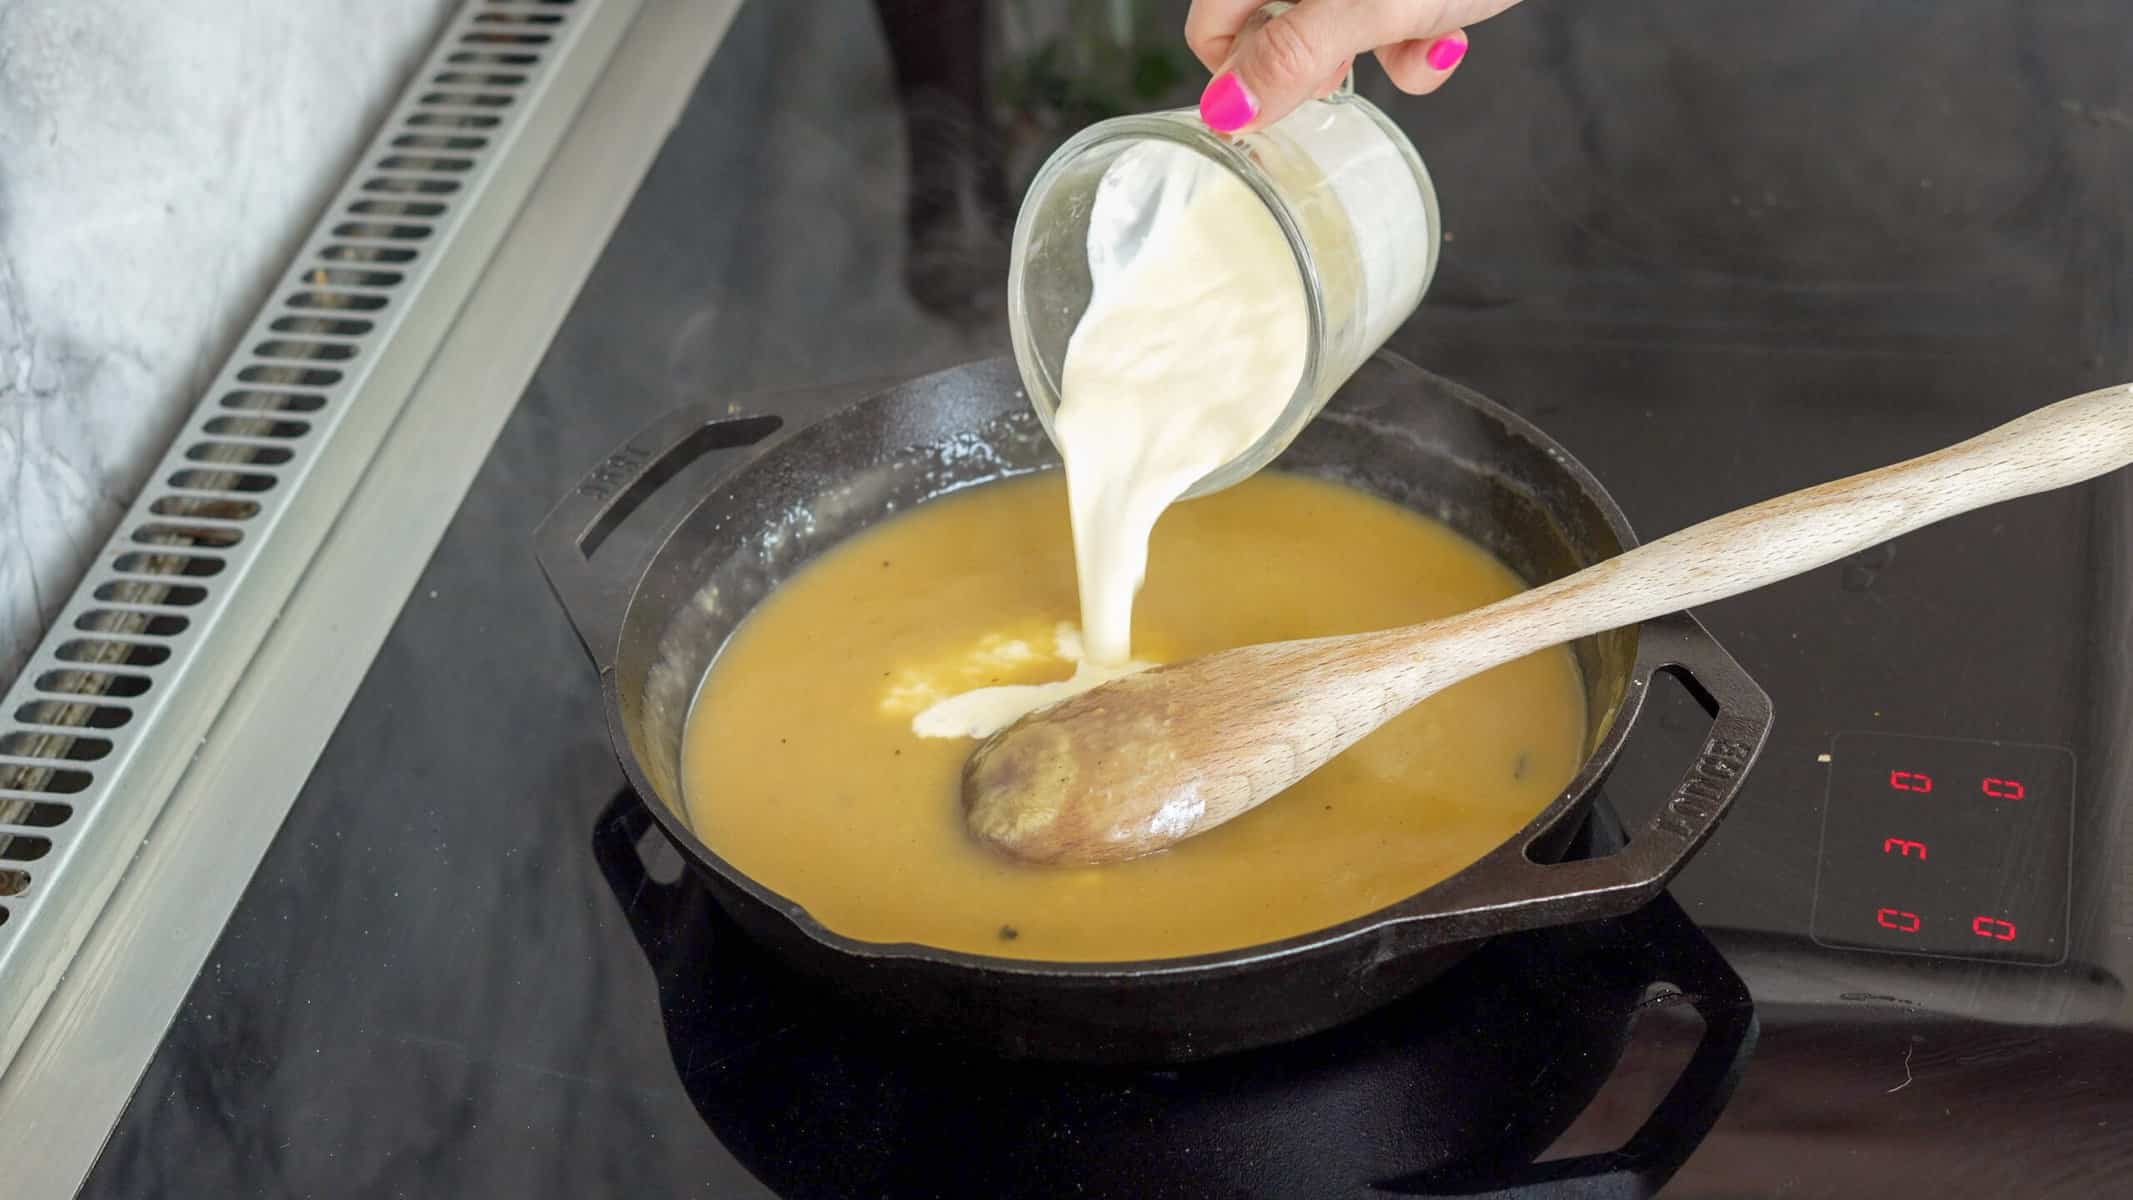 A small jug of cream being poured into the cast iron pan of melted butter by a wooden spoon.